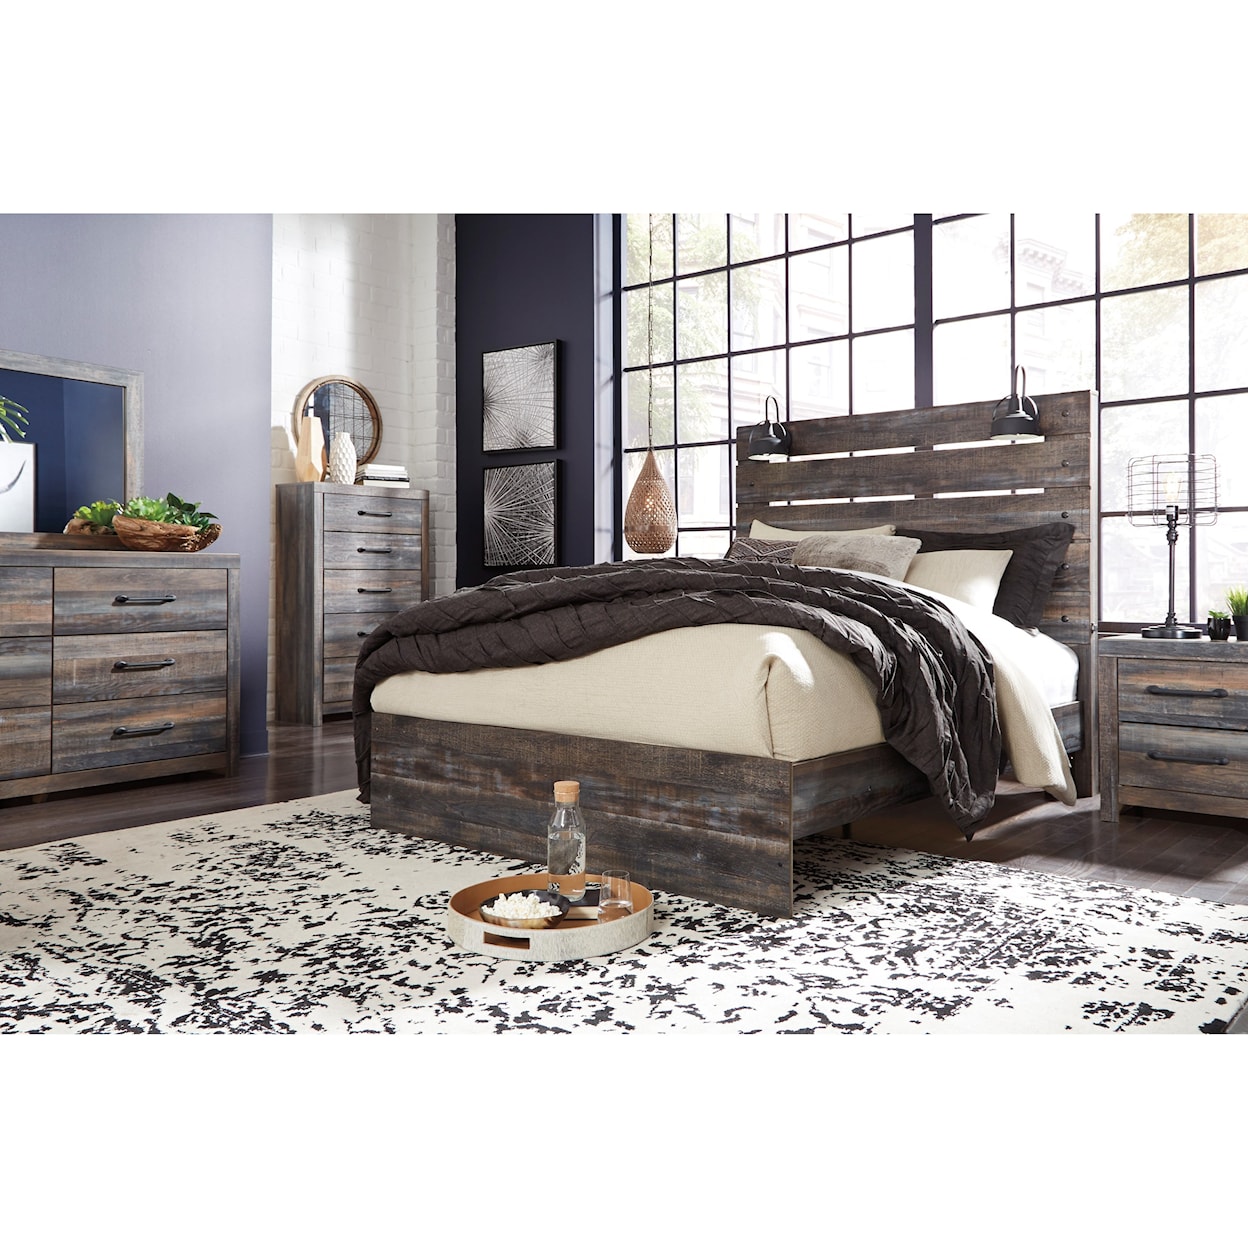 Signature Design by Ashley Baleigh King Bedroom Group